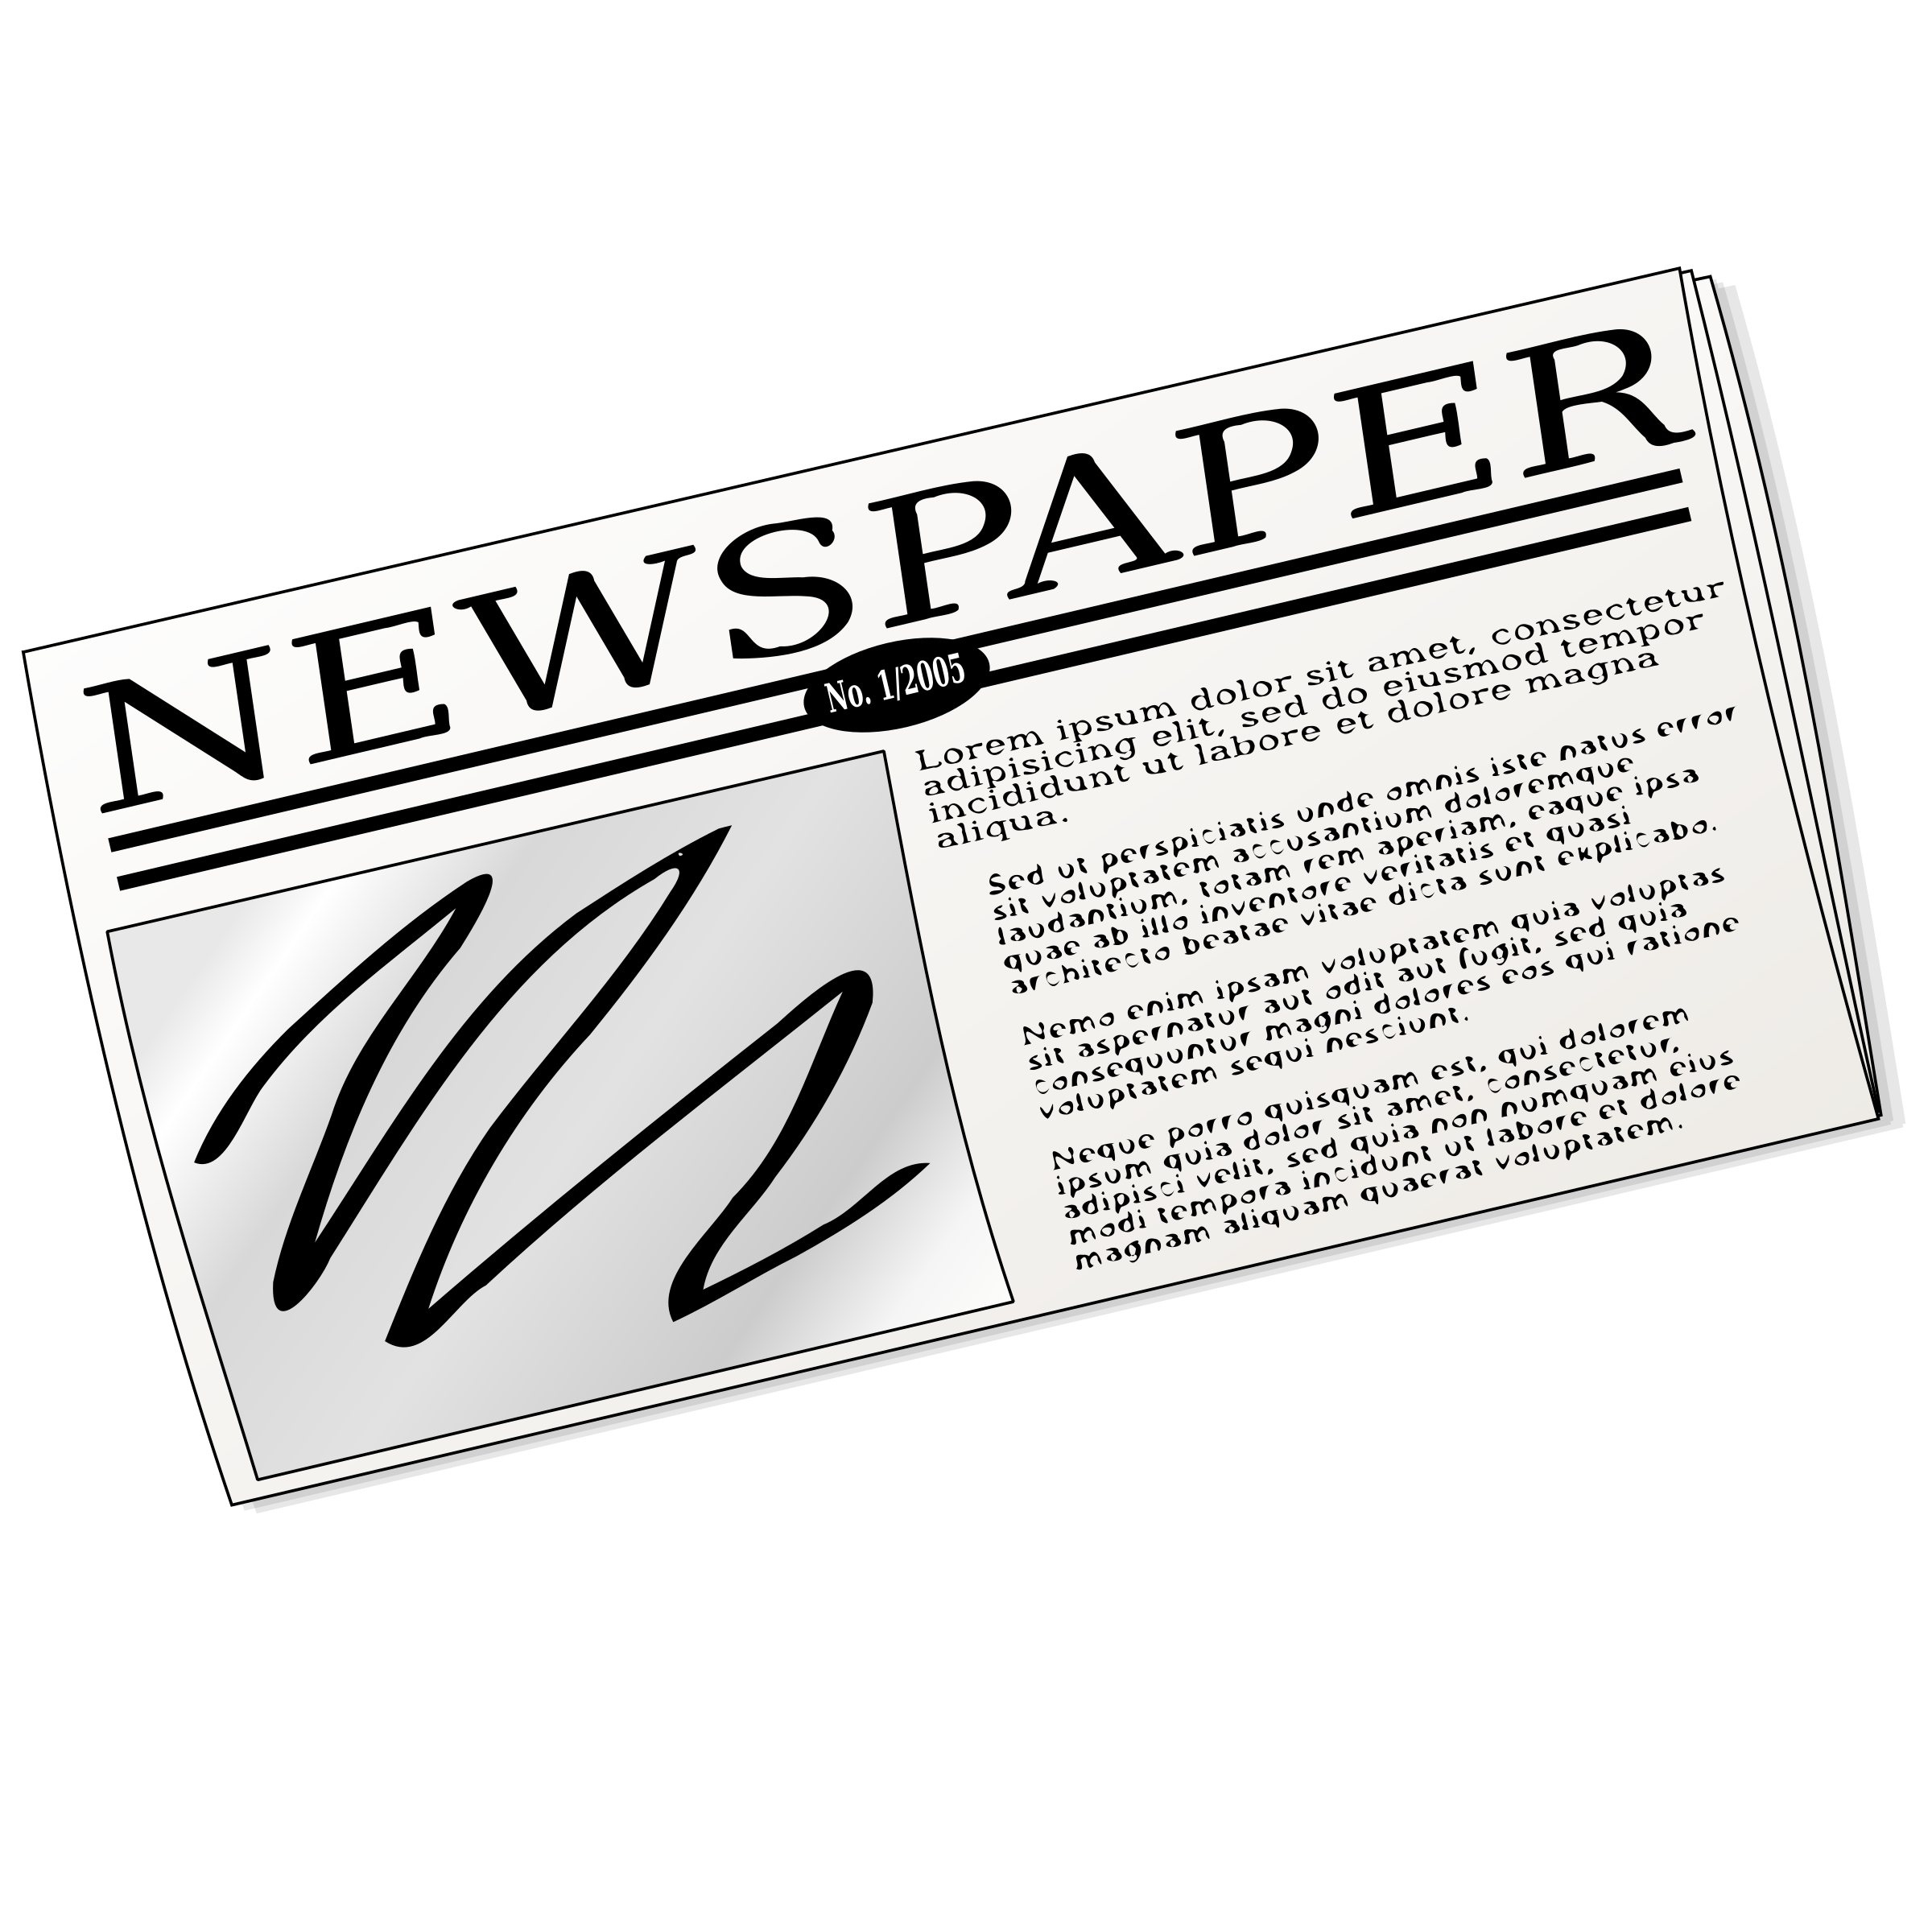 Free newspaper clipart the cliparts 2 - Cliparting.com